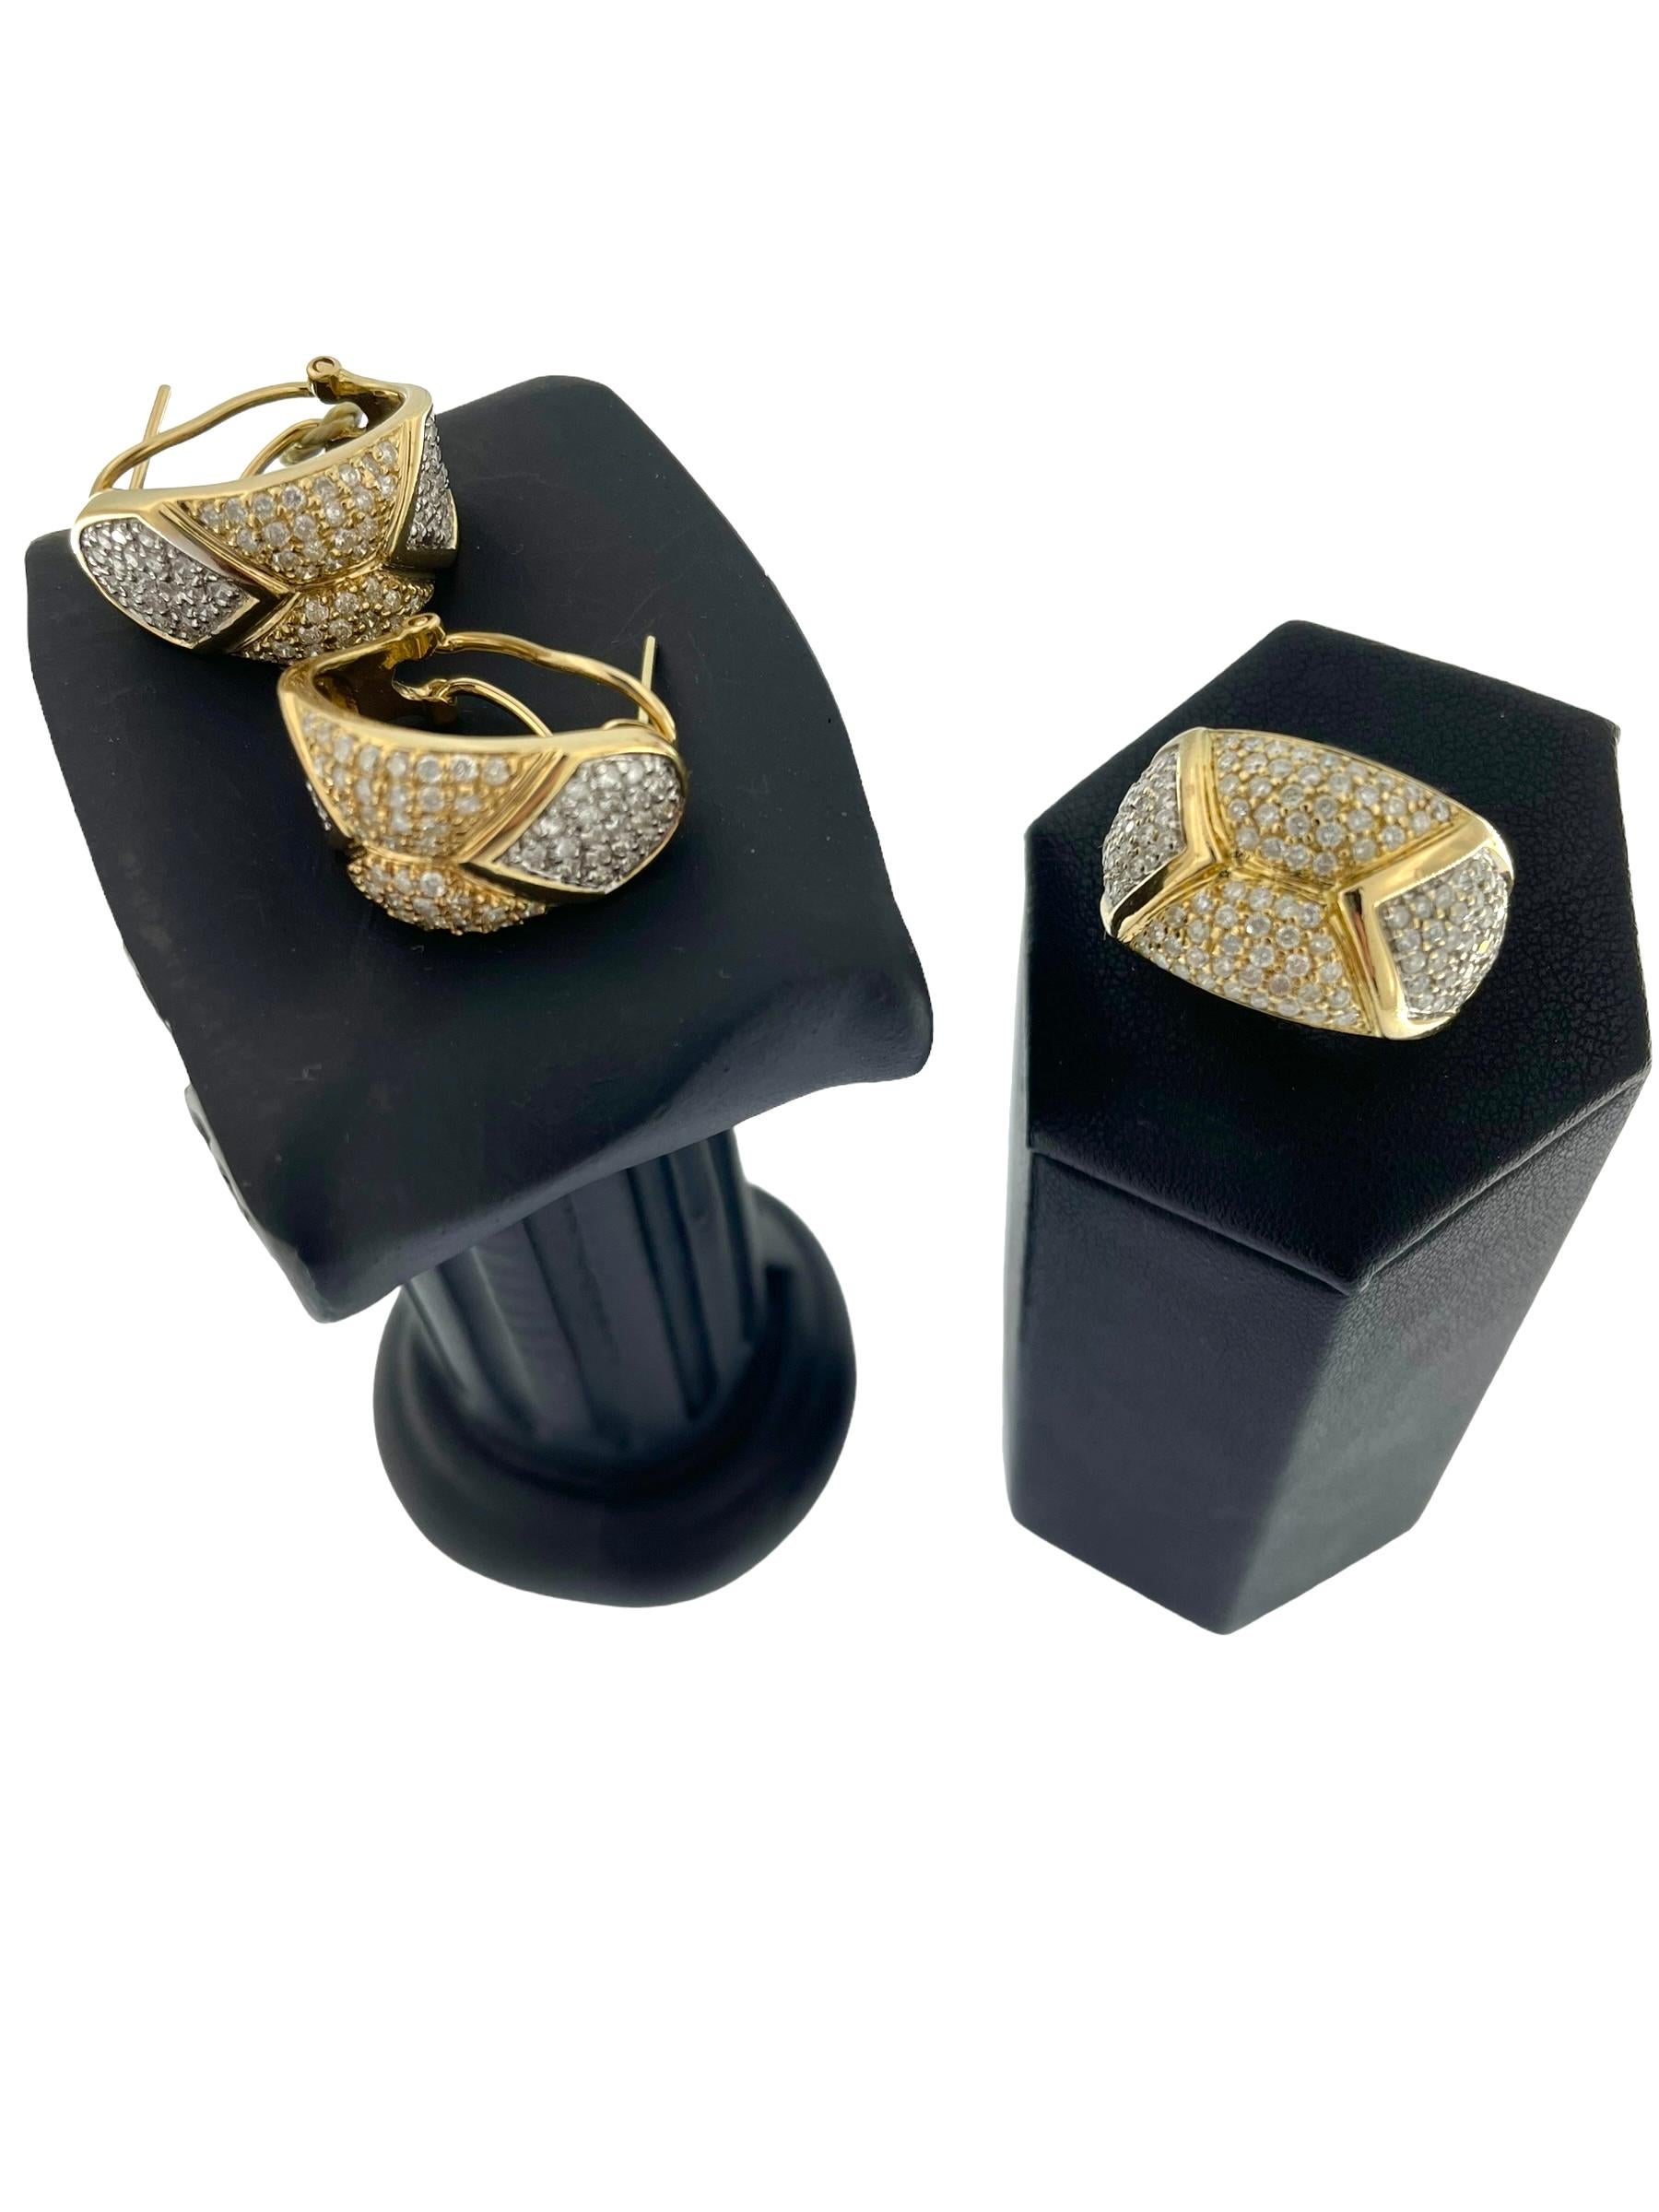 Modern French Jewelry Set Earrings and Ring Gold and Diamonds For Sale 3